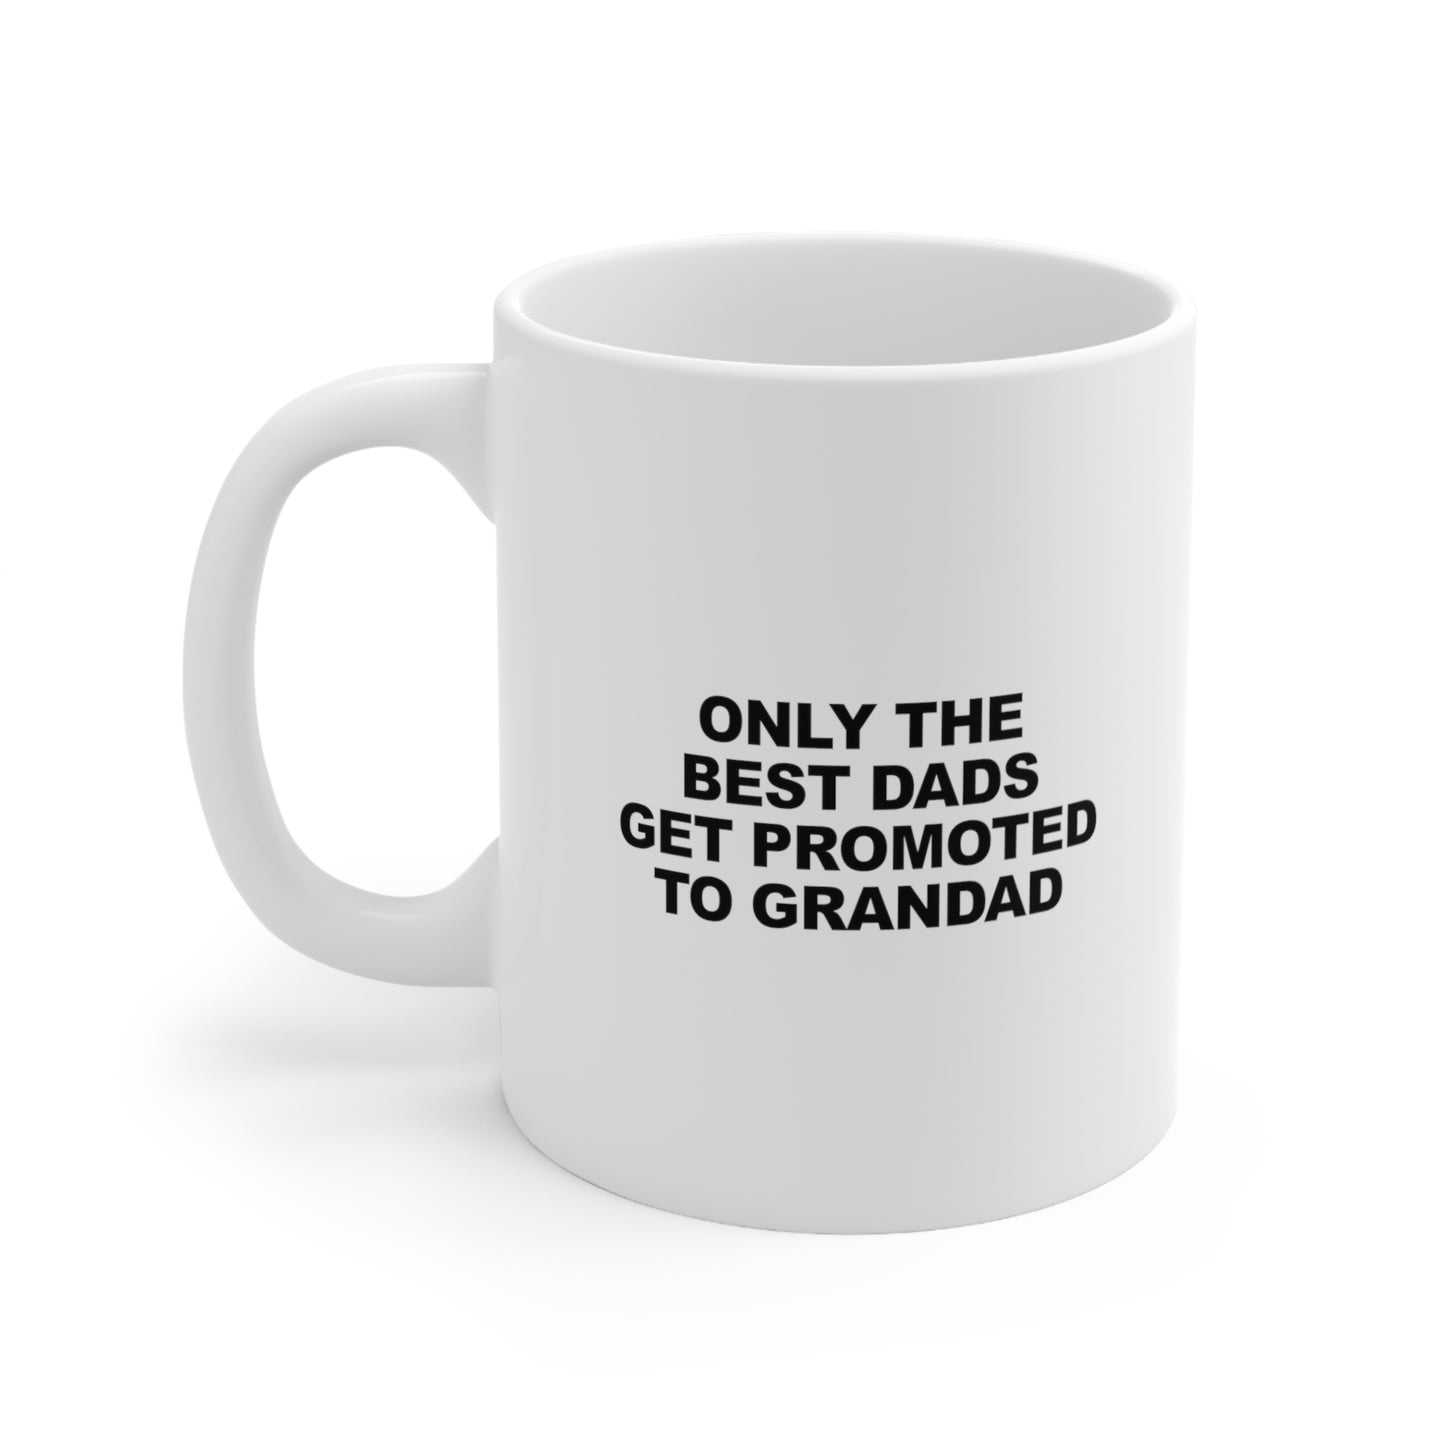 Only the best dads get promoted to grandad Coffee Mug